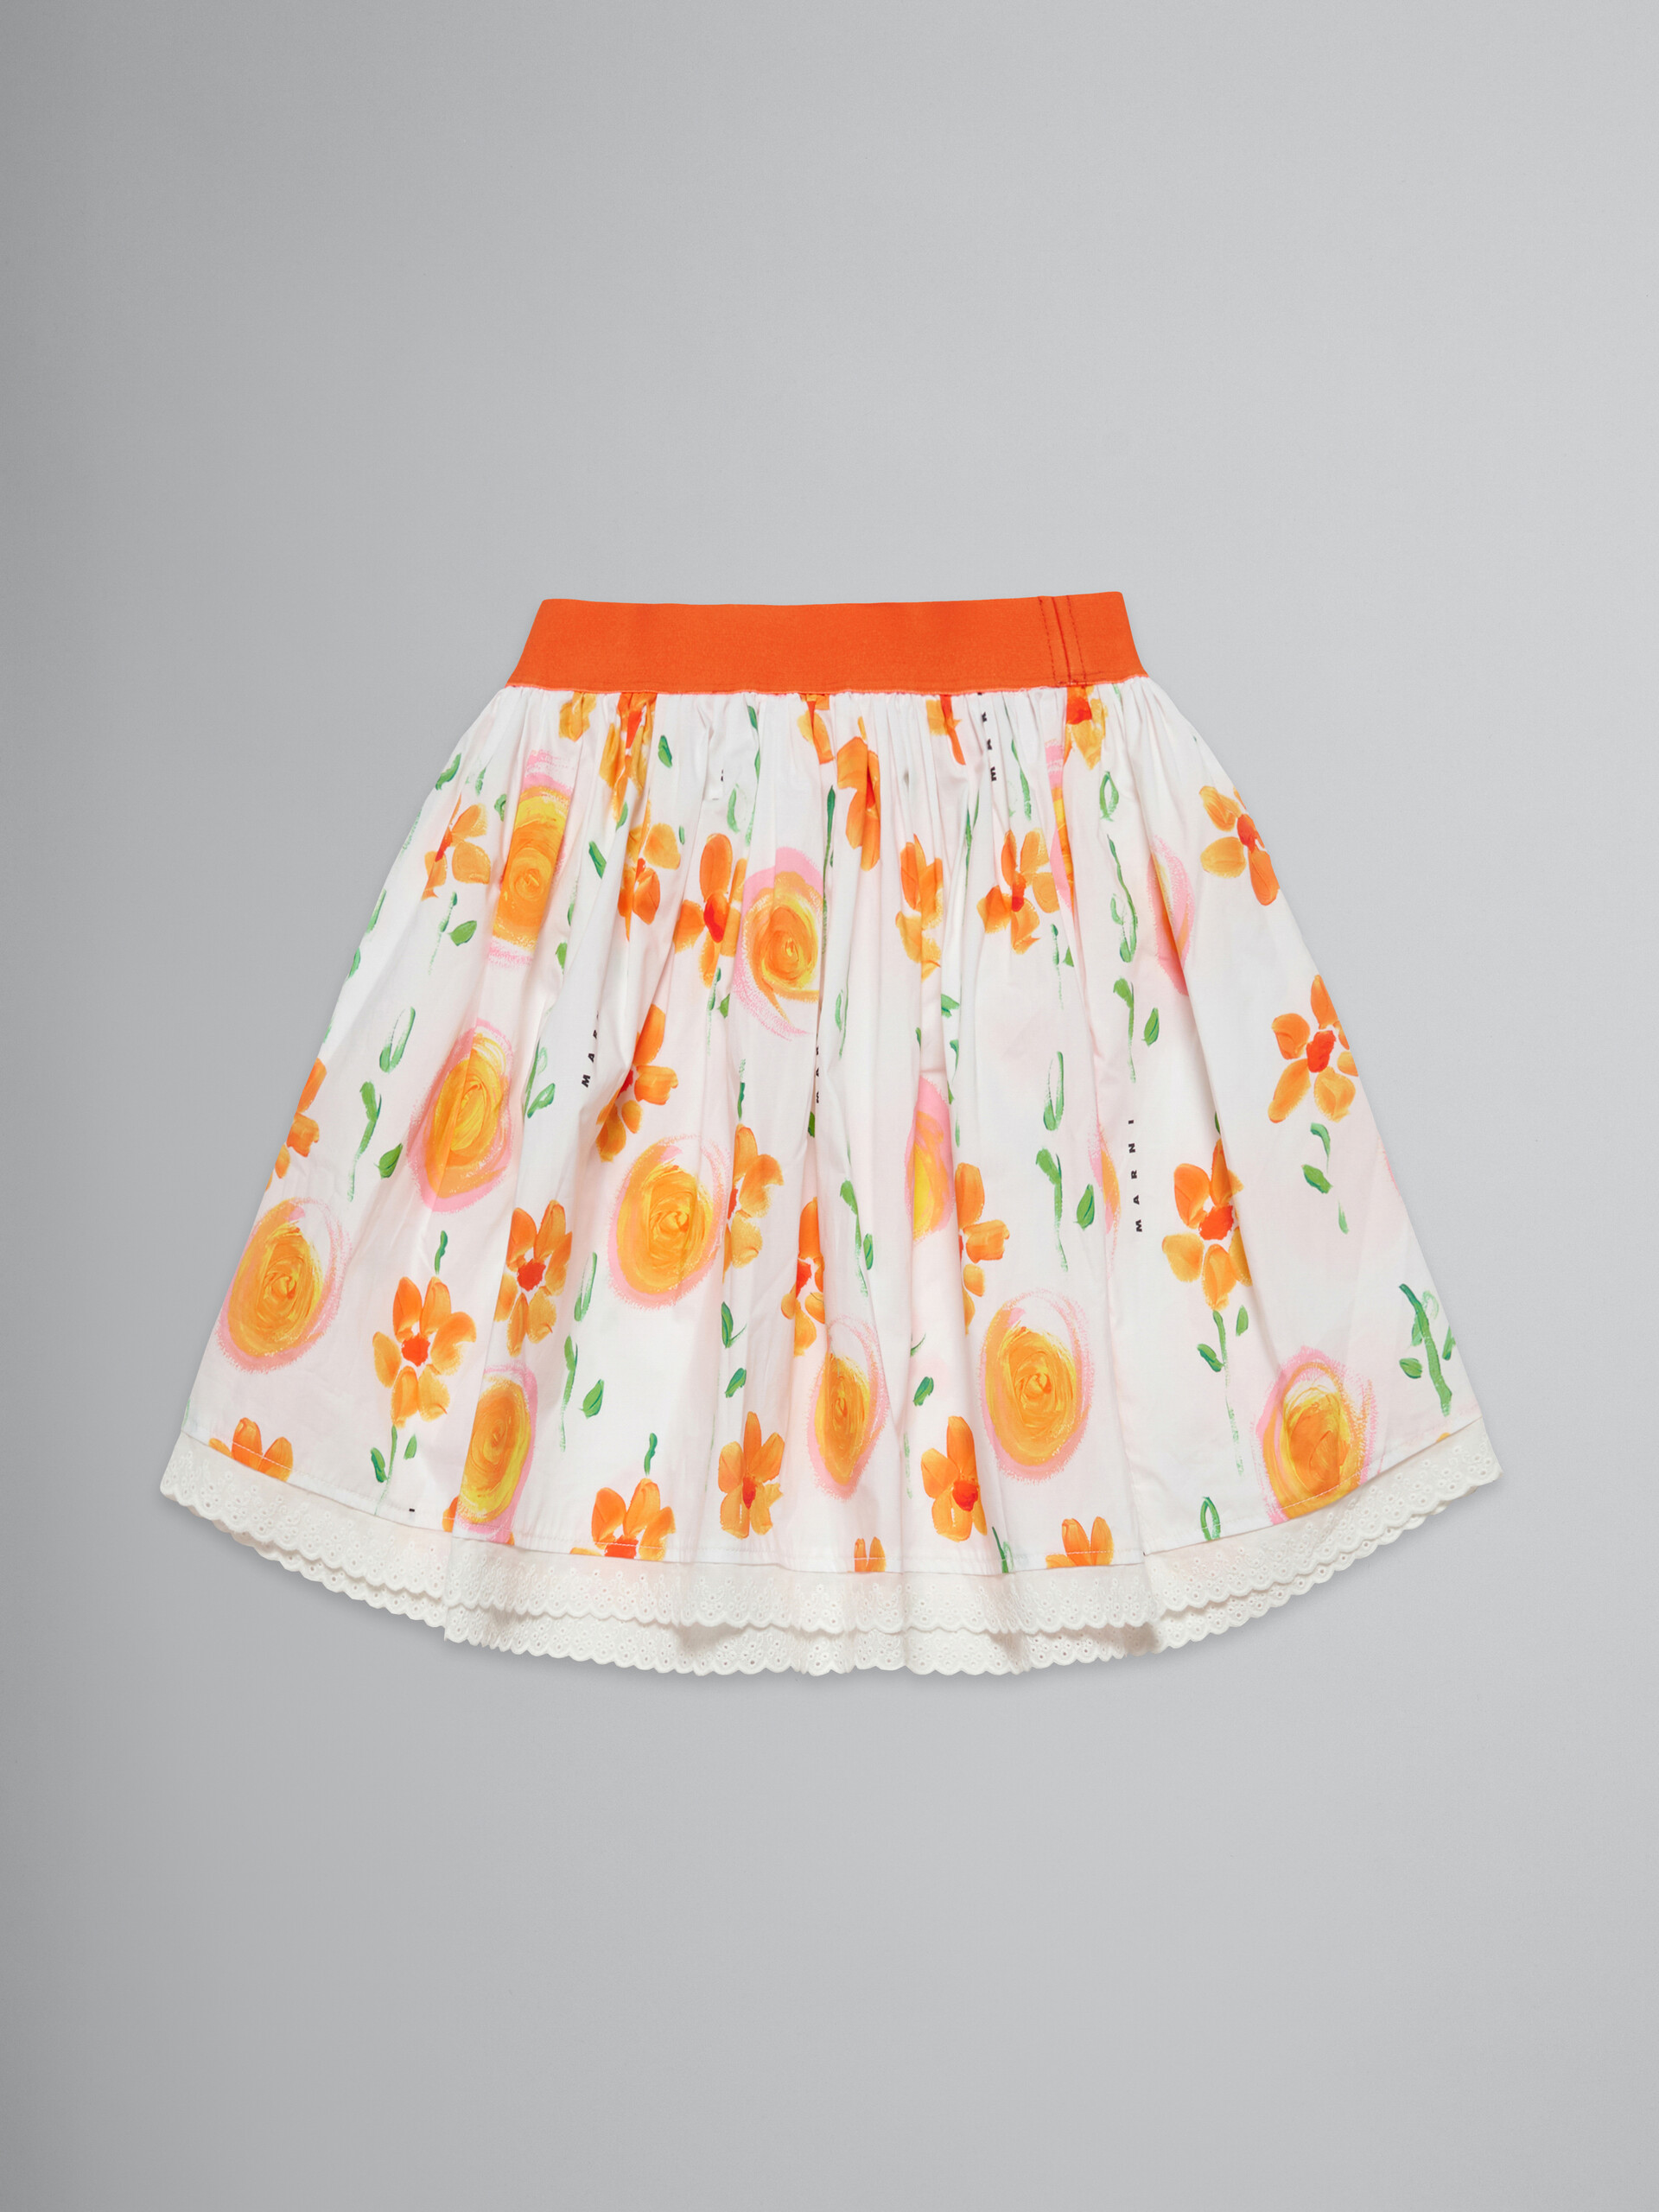 White poplin skirt with Sunny Day - Skirts - Image 2